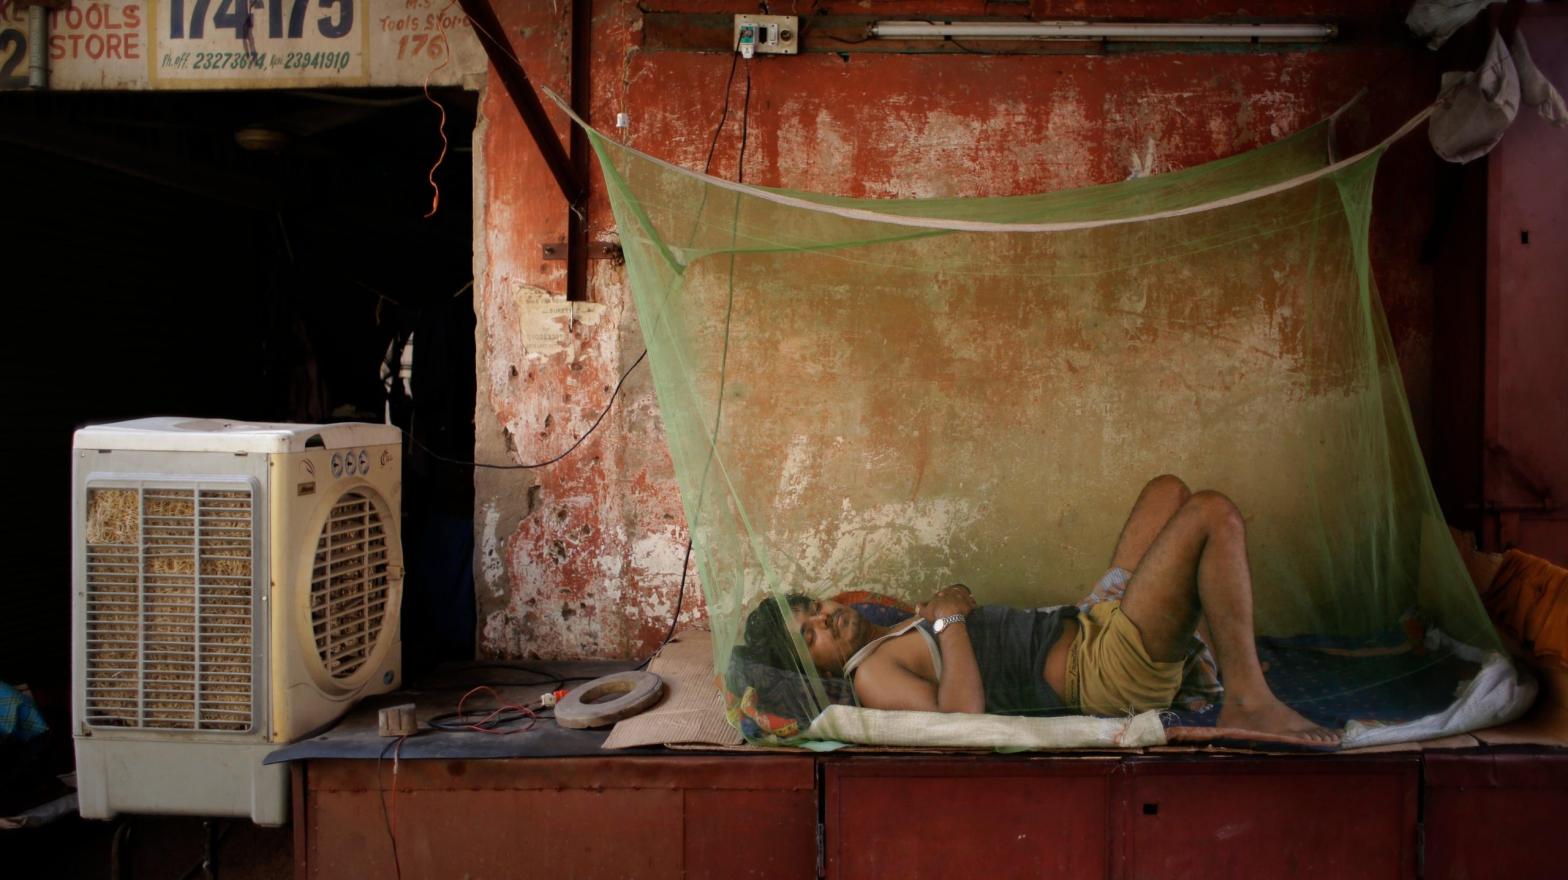 An Indian migrant daily wage worker sleeps next to an air cooler under a mosquito net on a steel box, used to store items of shop at night, in New Delhi. (Photo: Altaf Qadri, AP)